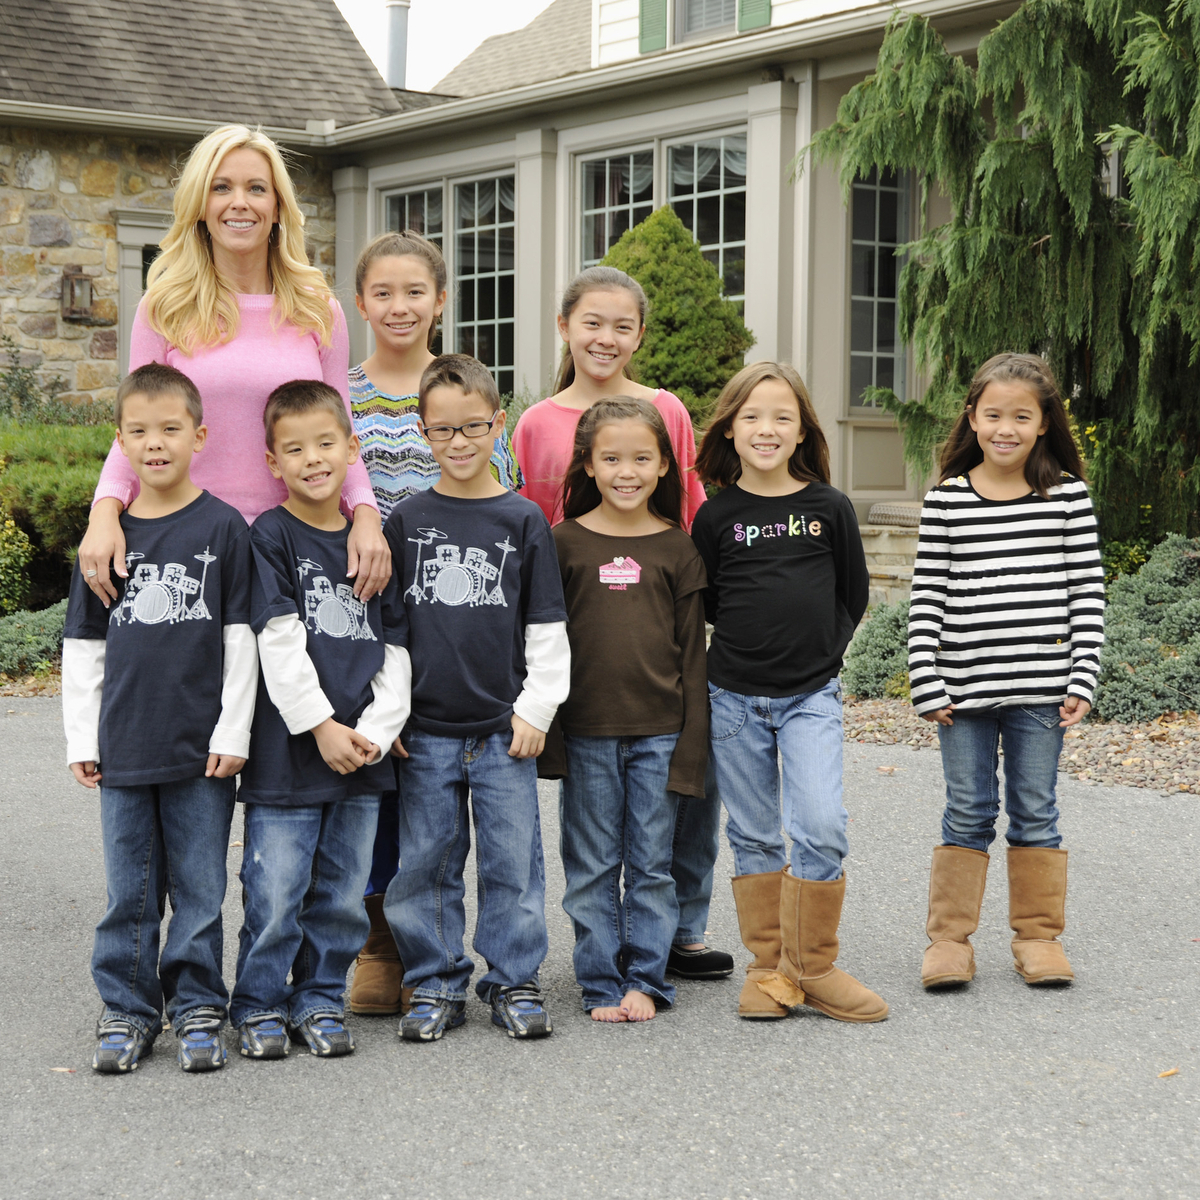 See How Jon & Kate Gosselin's 8 Kids Have Grown Up Through the Years